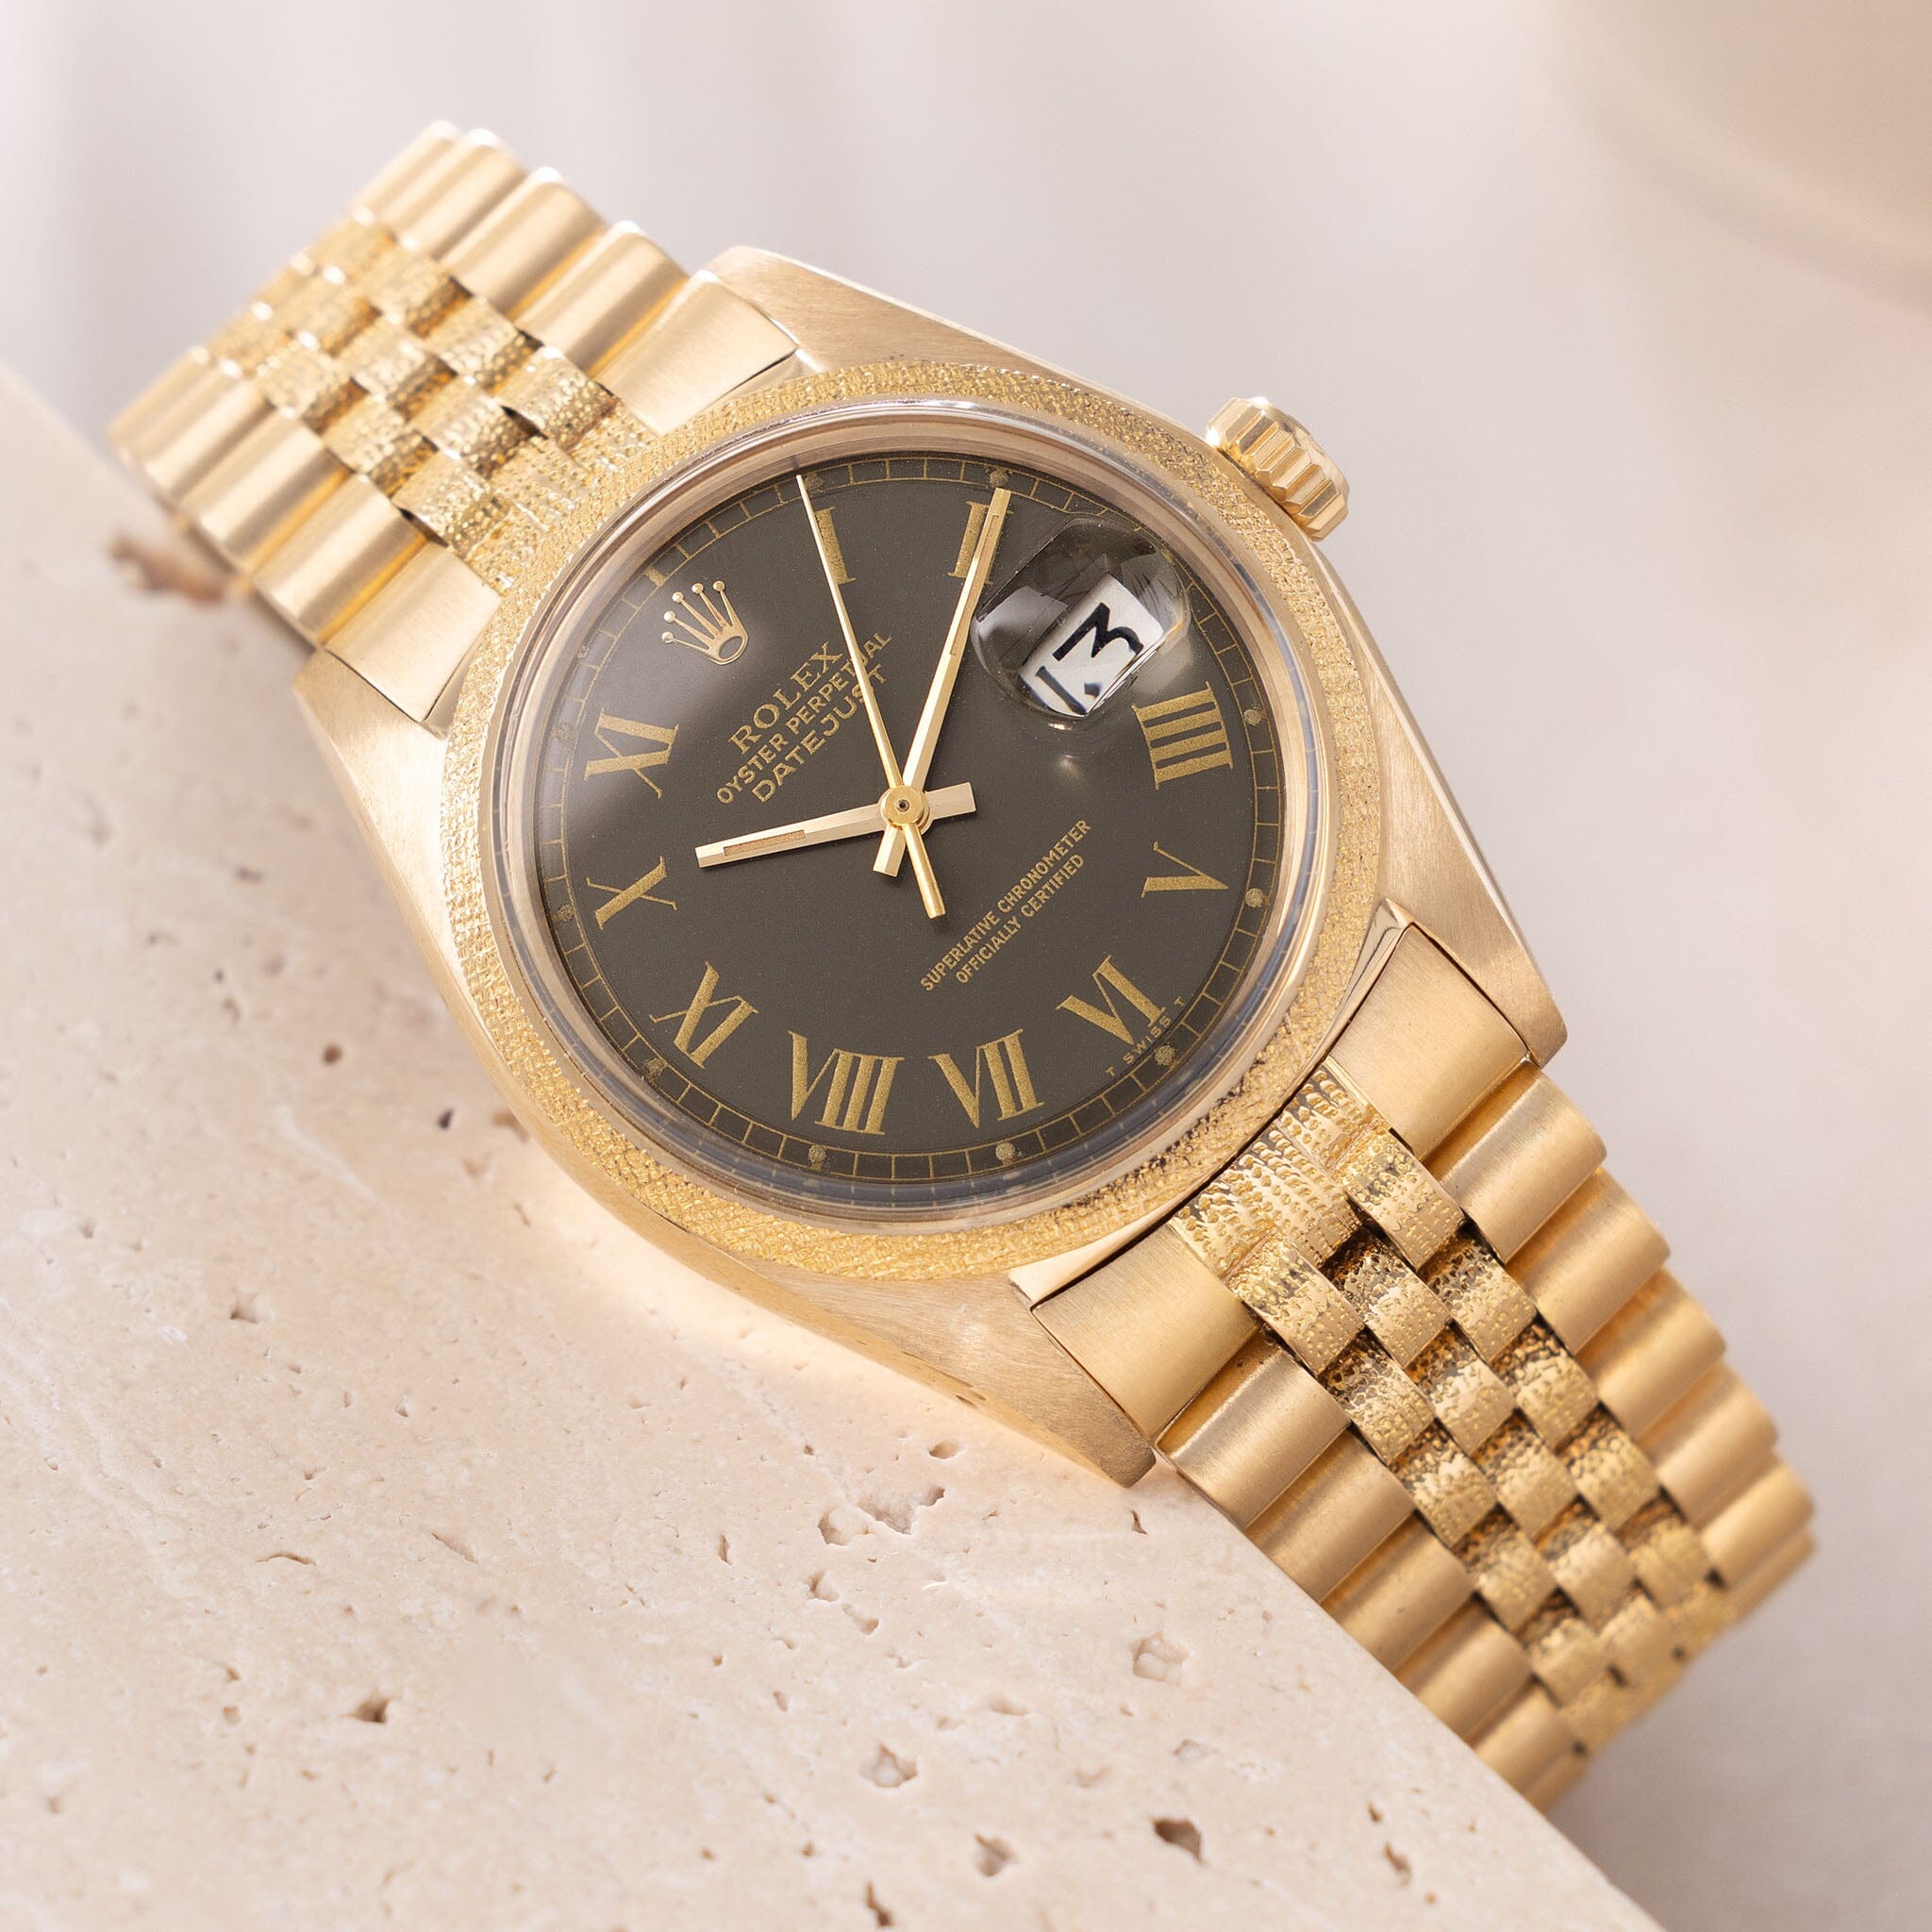 Datejust Colour changed Buckley dial Morellis finish ref 1611 Box and papers set